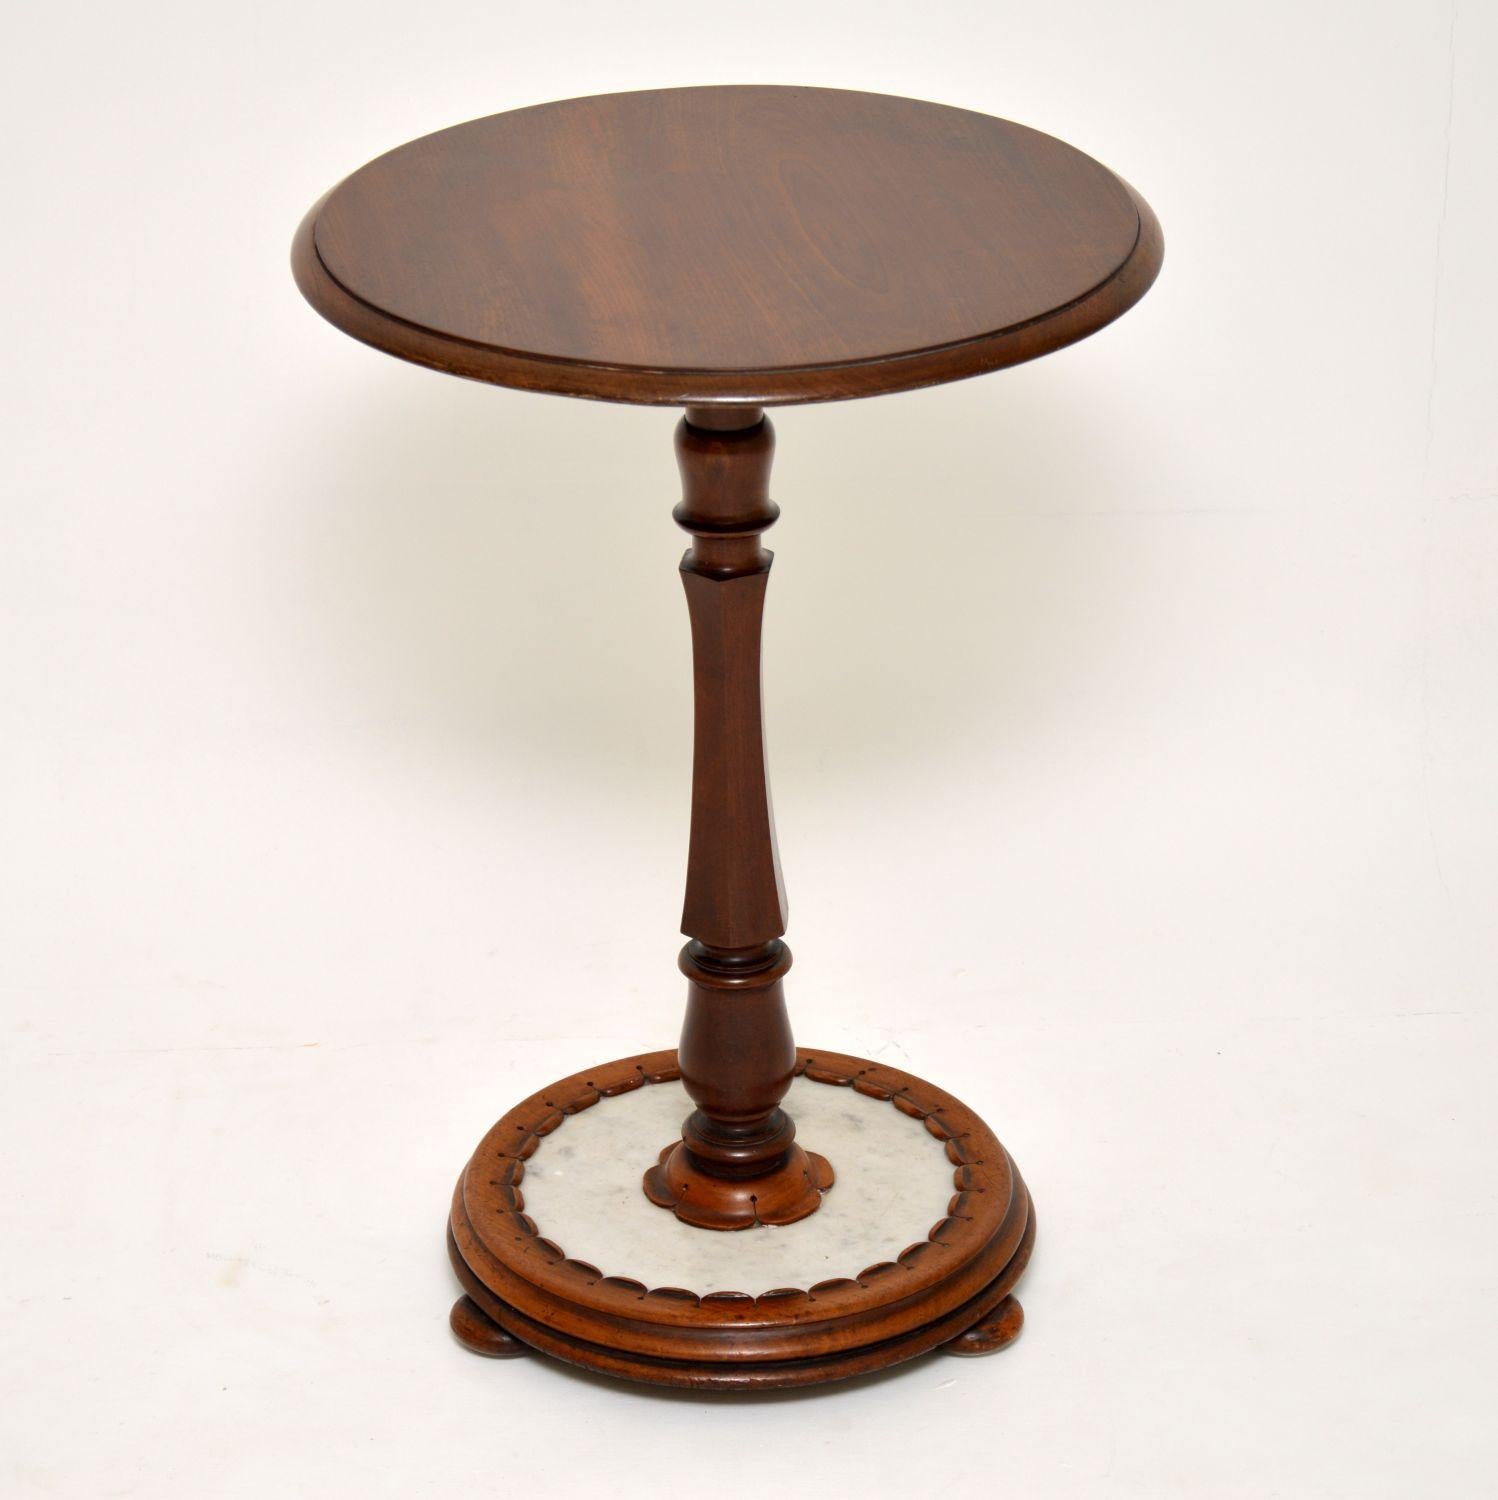 Very unusual antique William IV mahogany side table in excellent original condition and dating from the 1830s-1840s period.

It has a circular top with a turned pedestal, which has an octagonal middle section. The most interesting feature is the